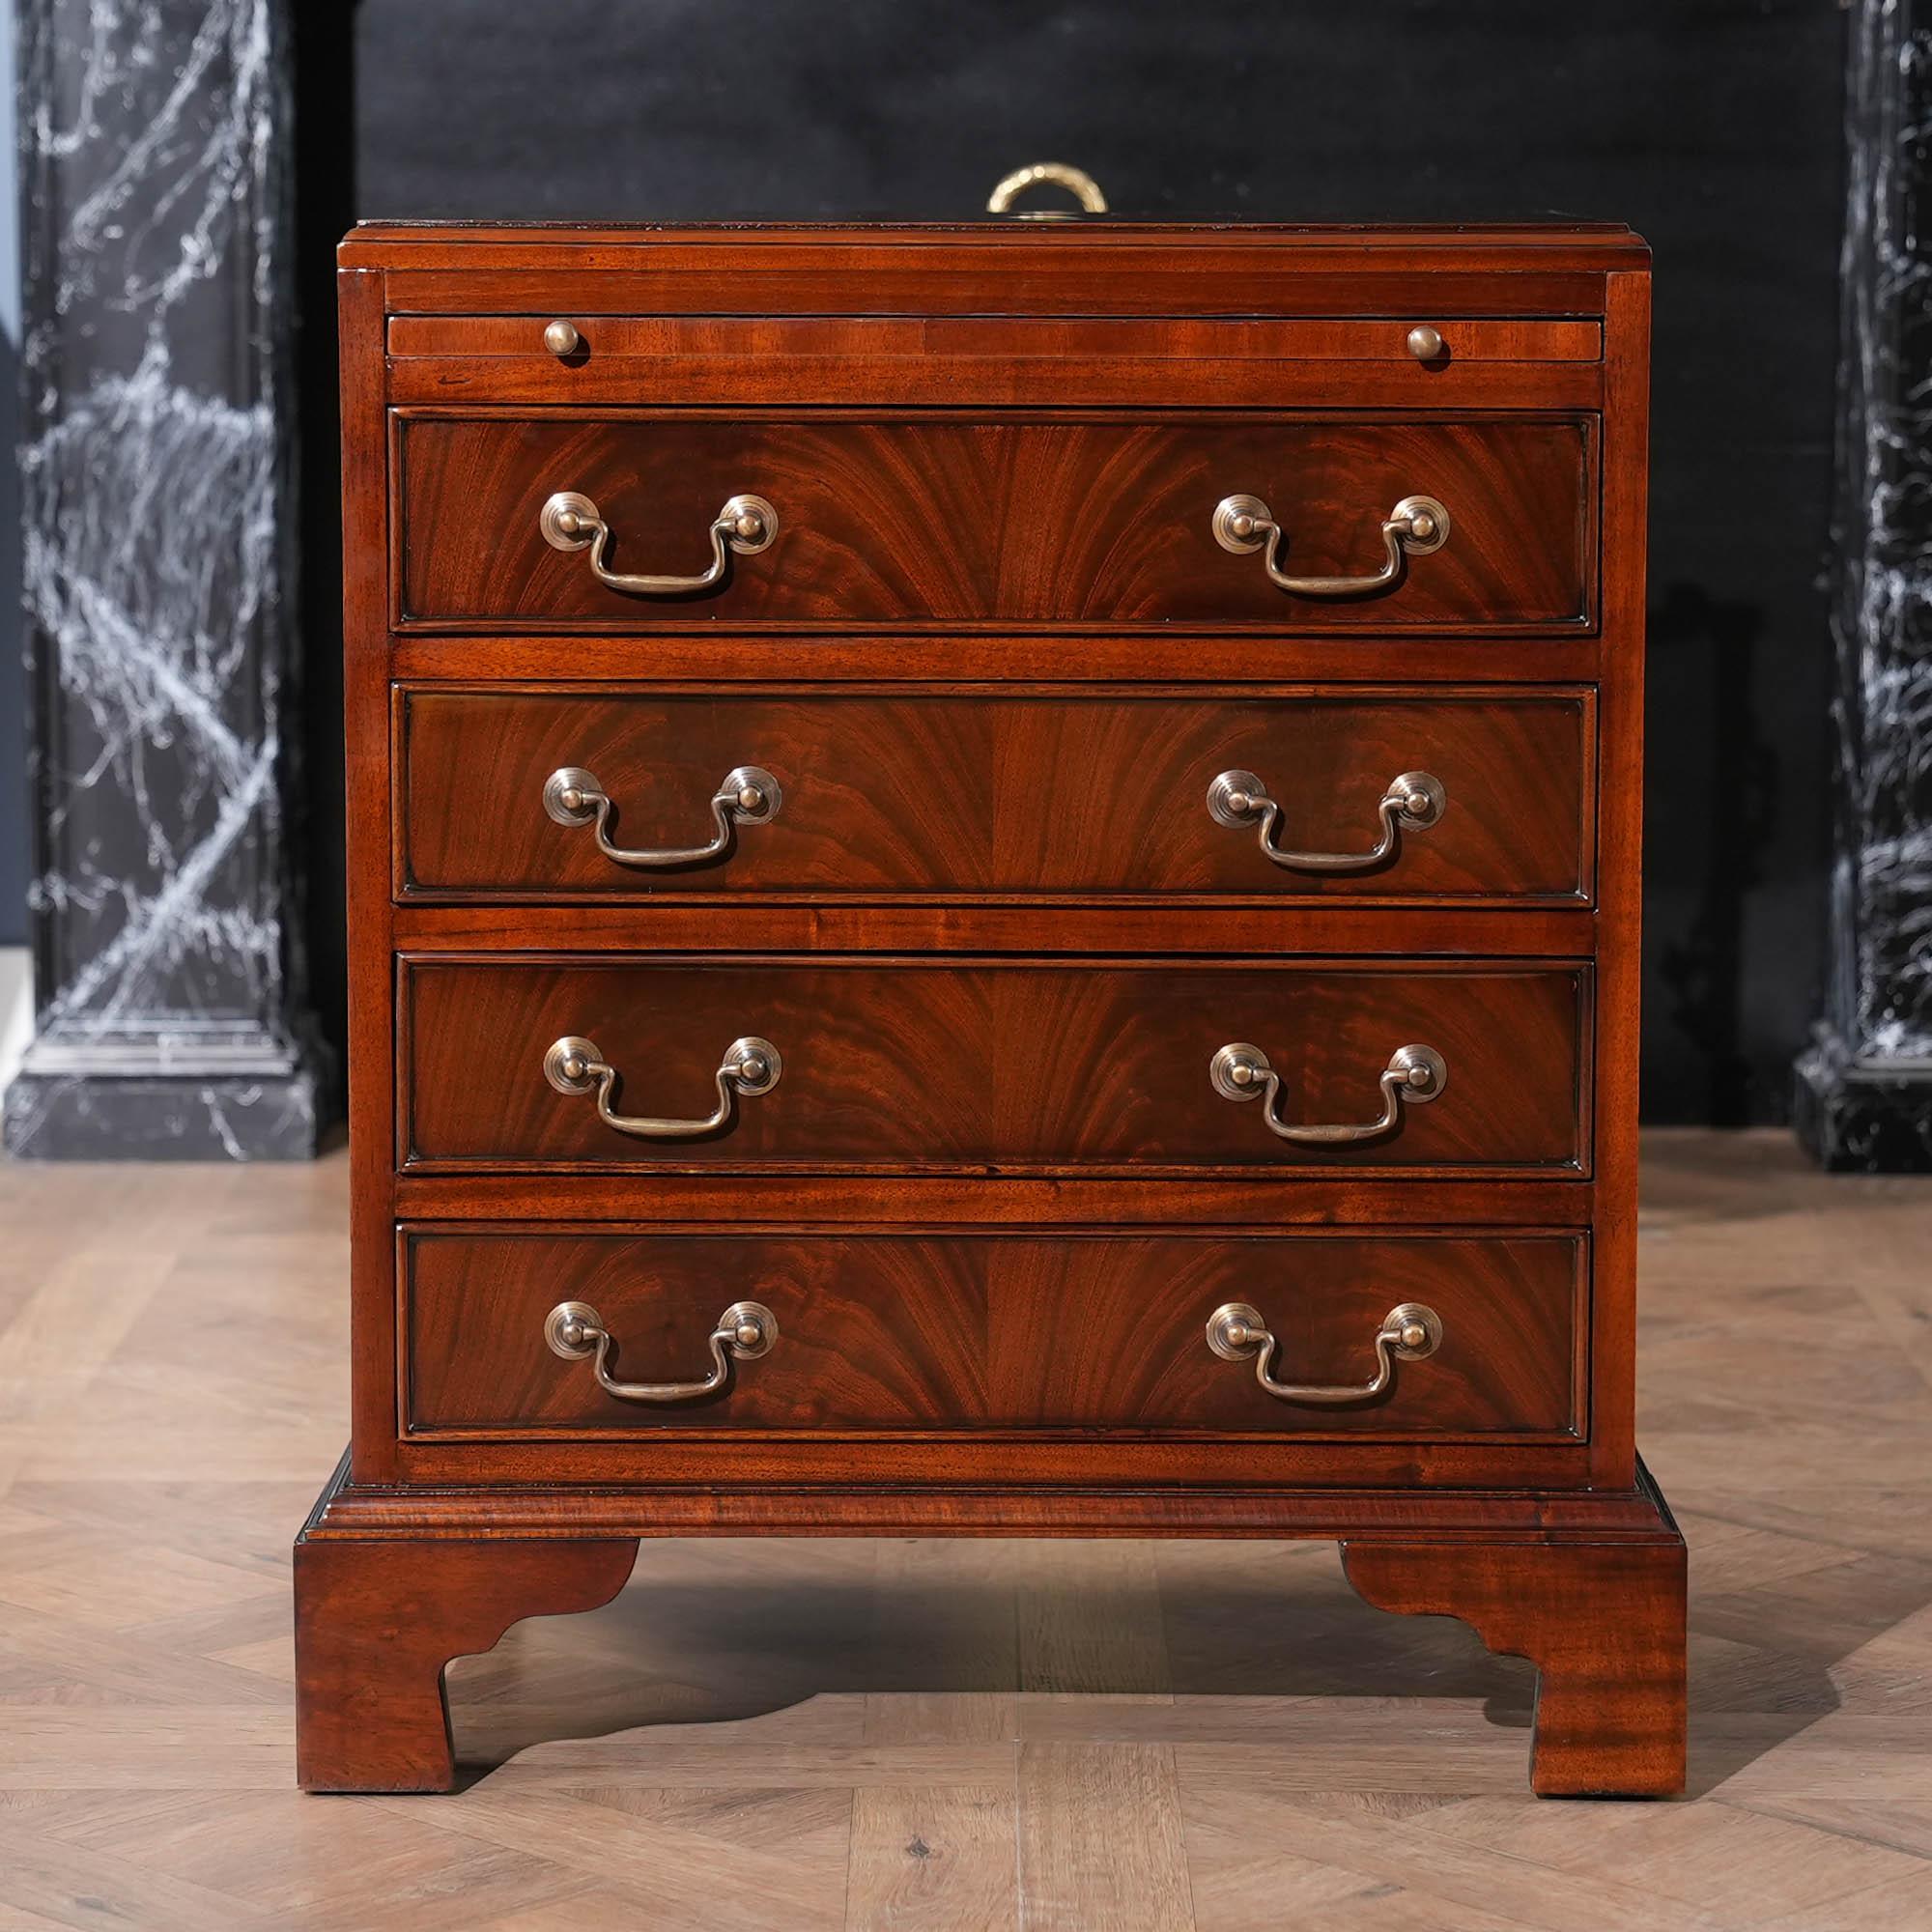 A Small Mahogany Campaign Chest in an English style. This Small Mahogany Campaign Chest works very well as a either a night stand or as an end table. Great quality construction features include the use of the finest mahogany veneers and mahogany